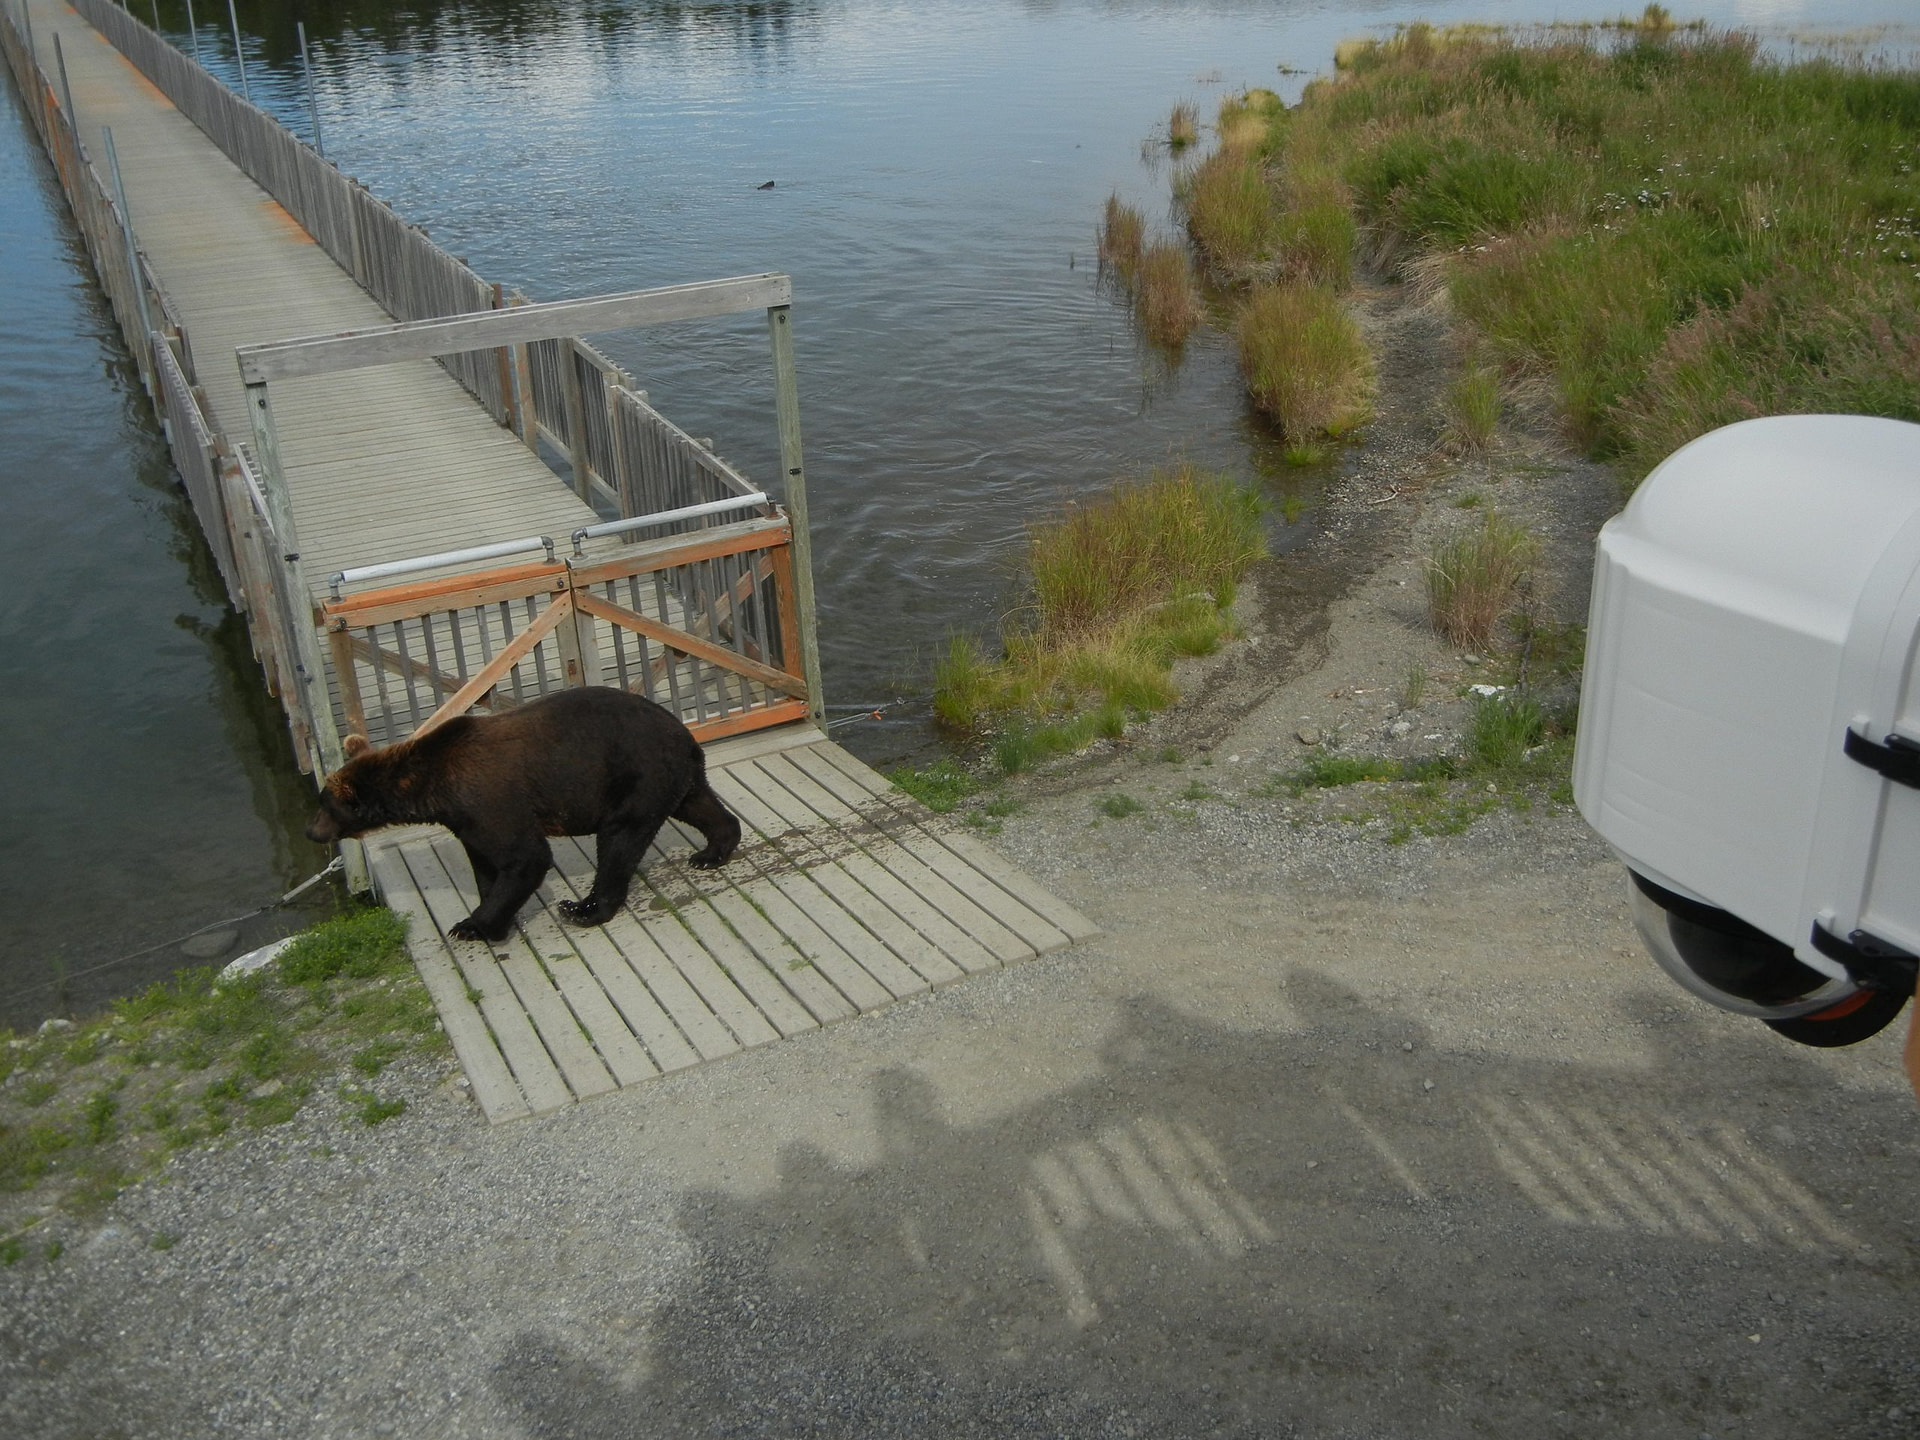 XRain Self Wiping Camera Enclosure System Installed On The Lower River Platform at Brooks Camp In Katmai National Park Alaska Overlooking a Brown Bear 